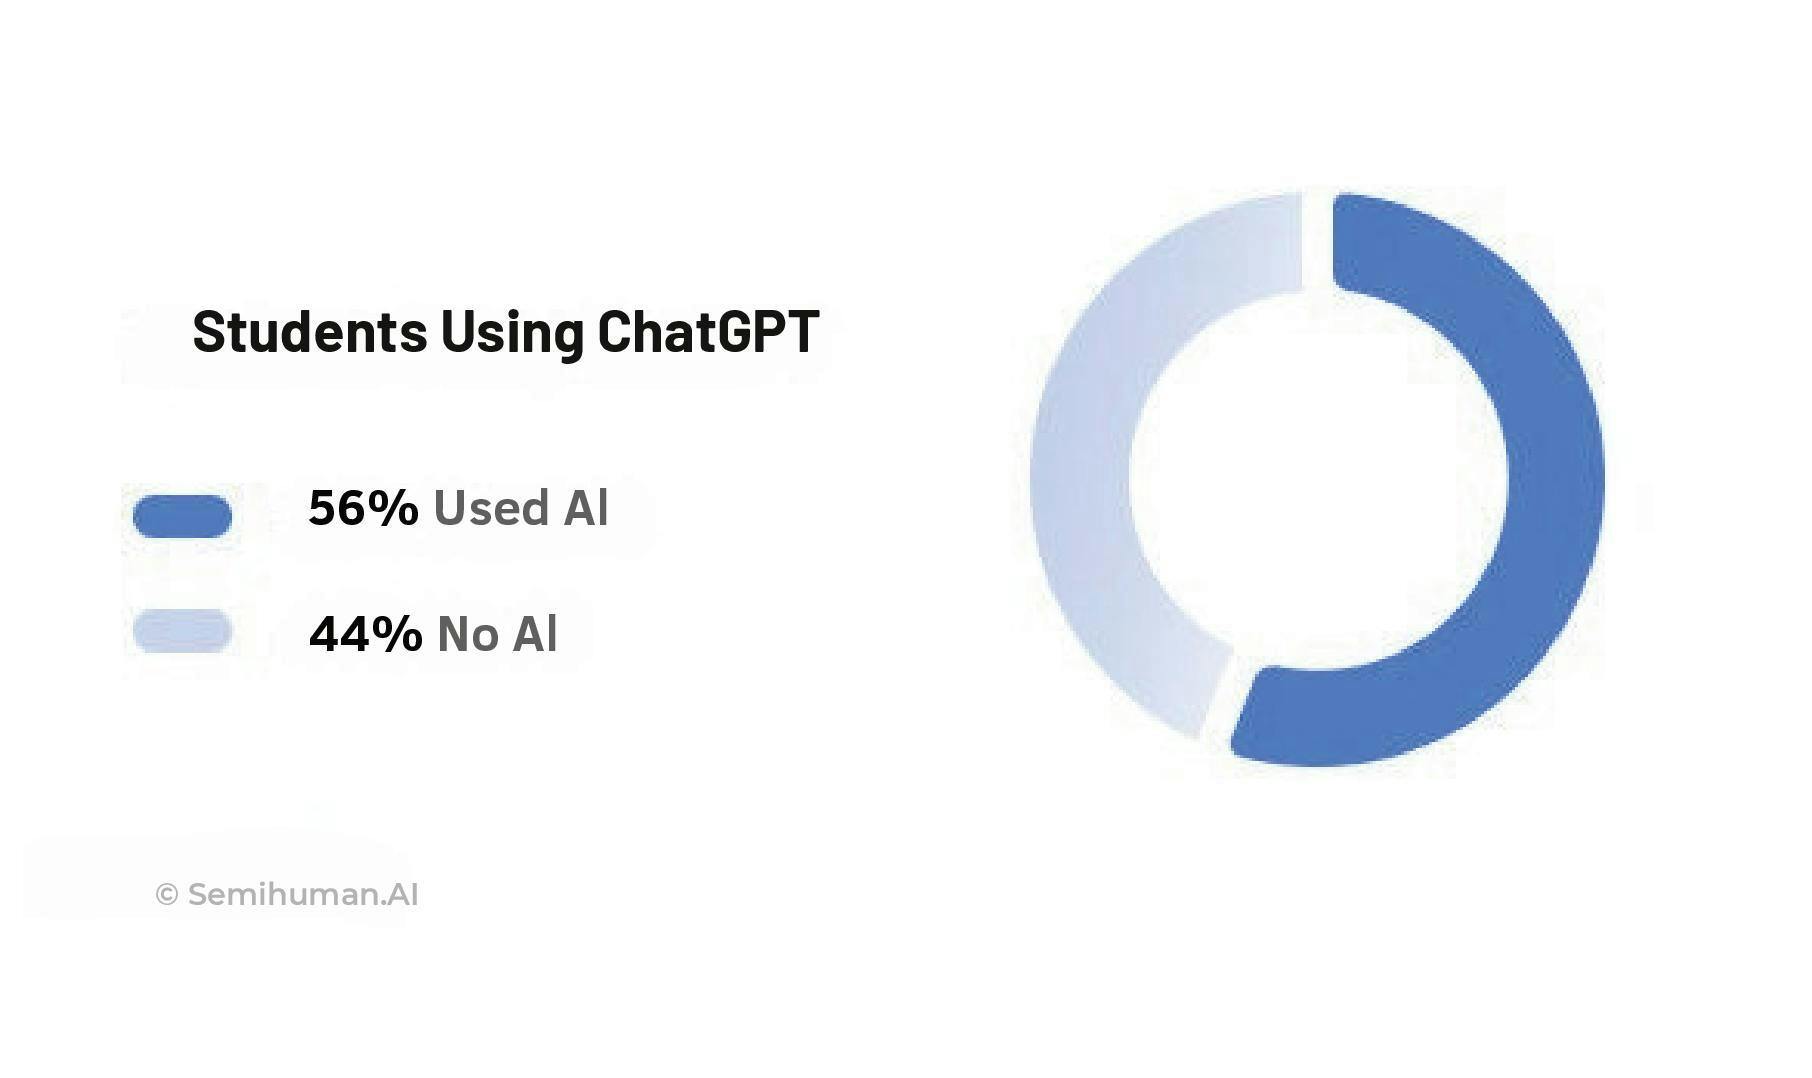 Can professors detect chat gpt